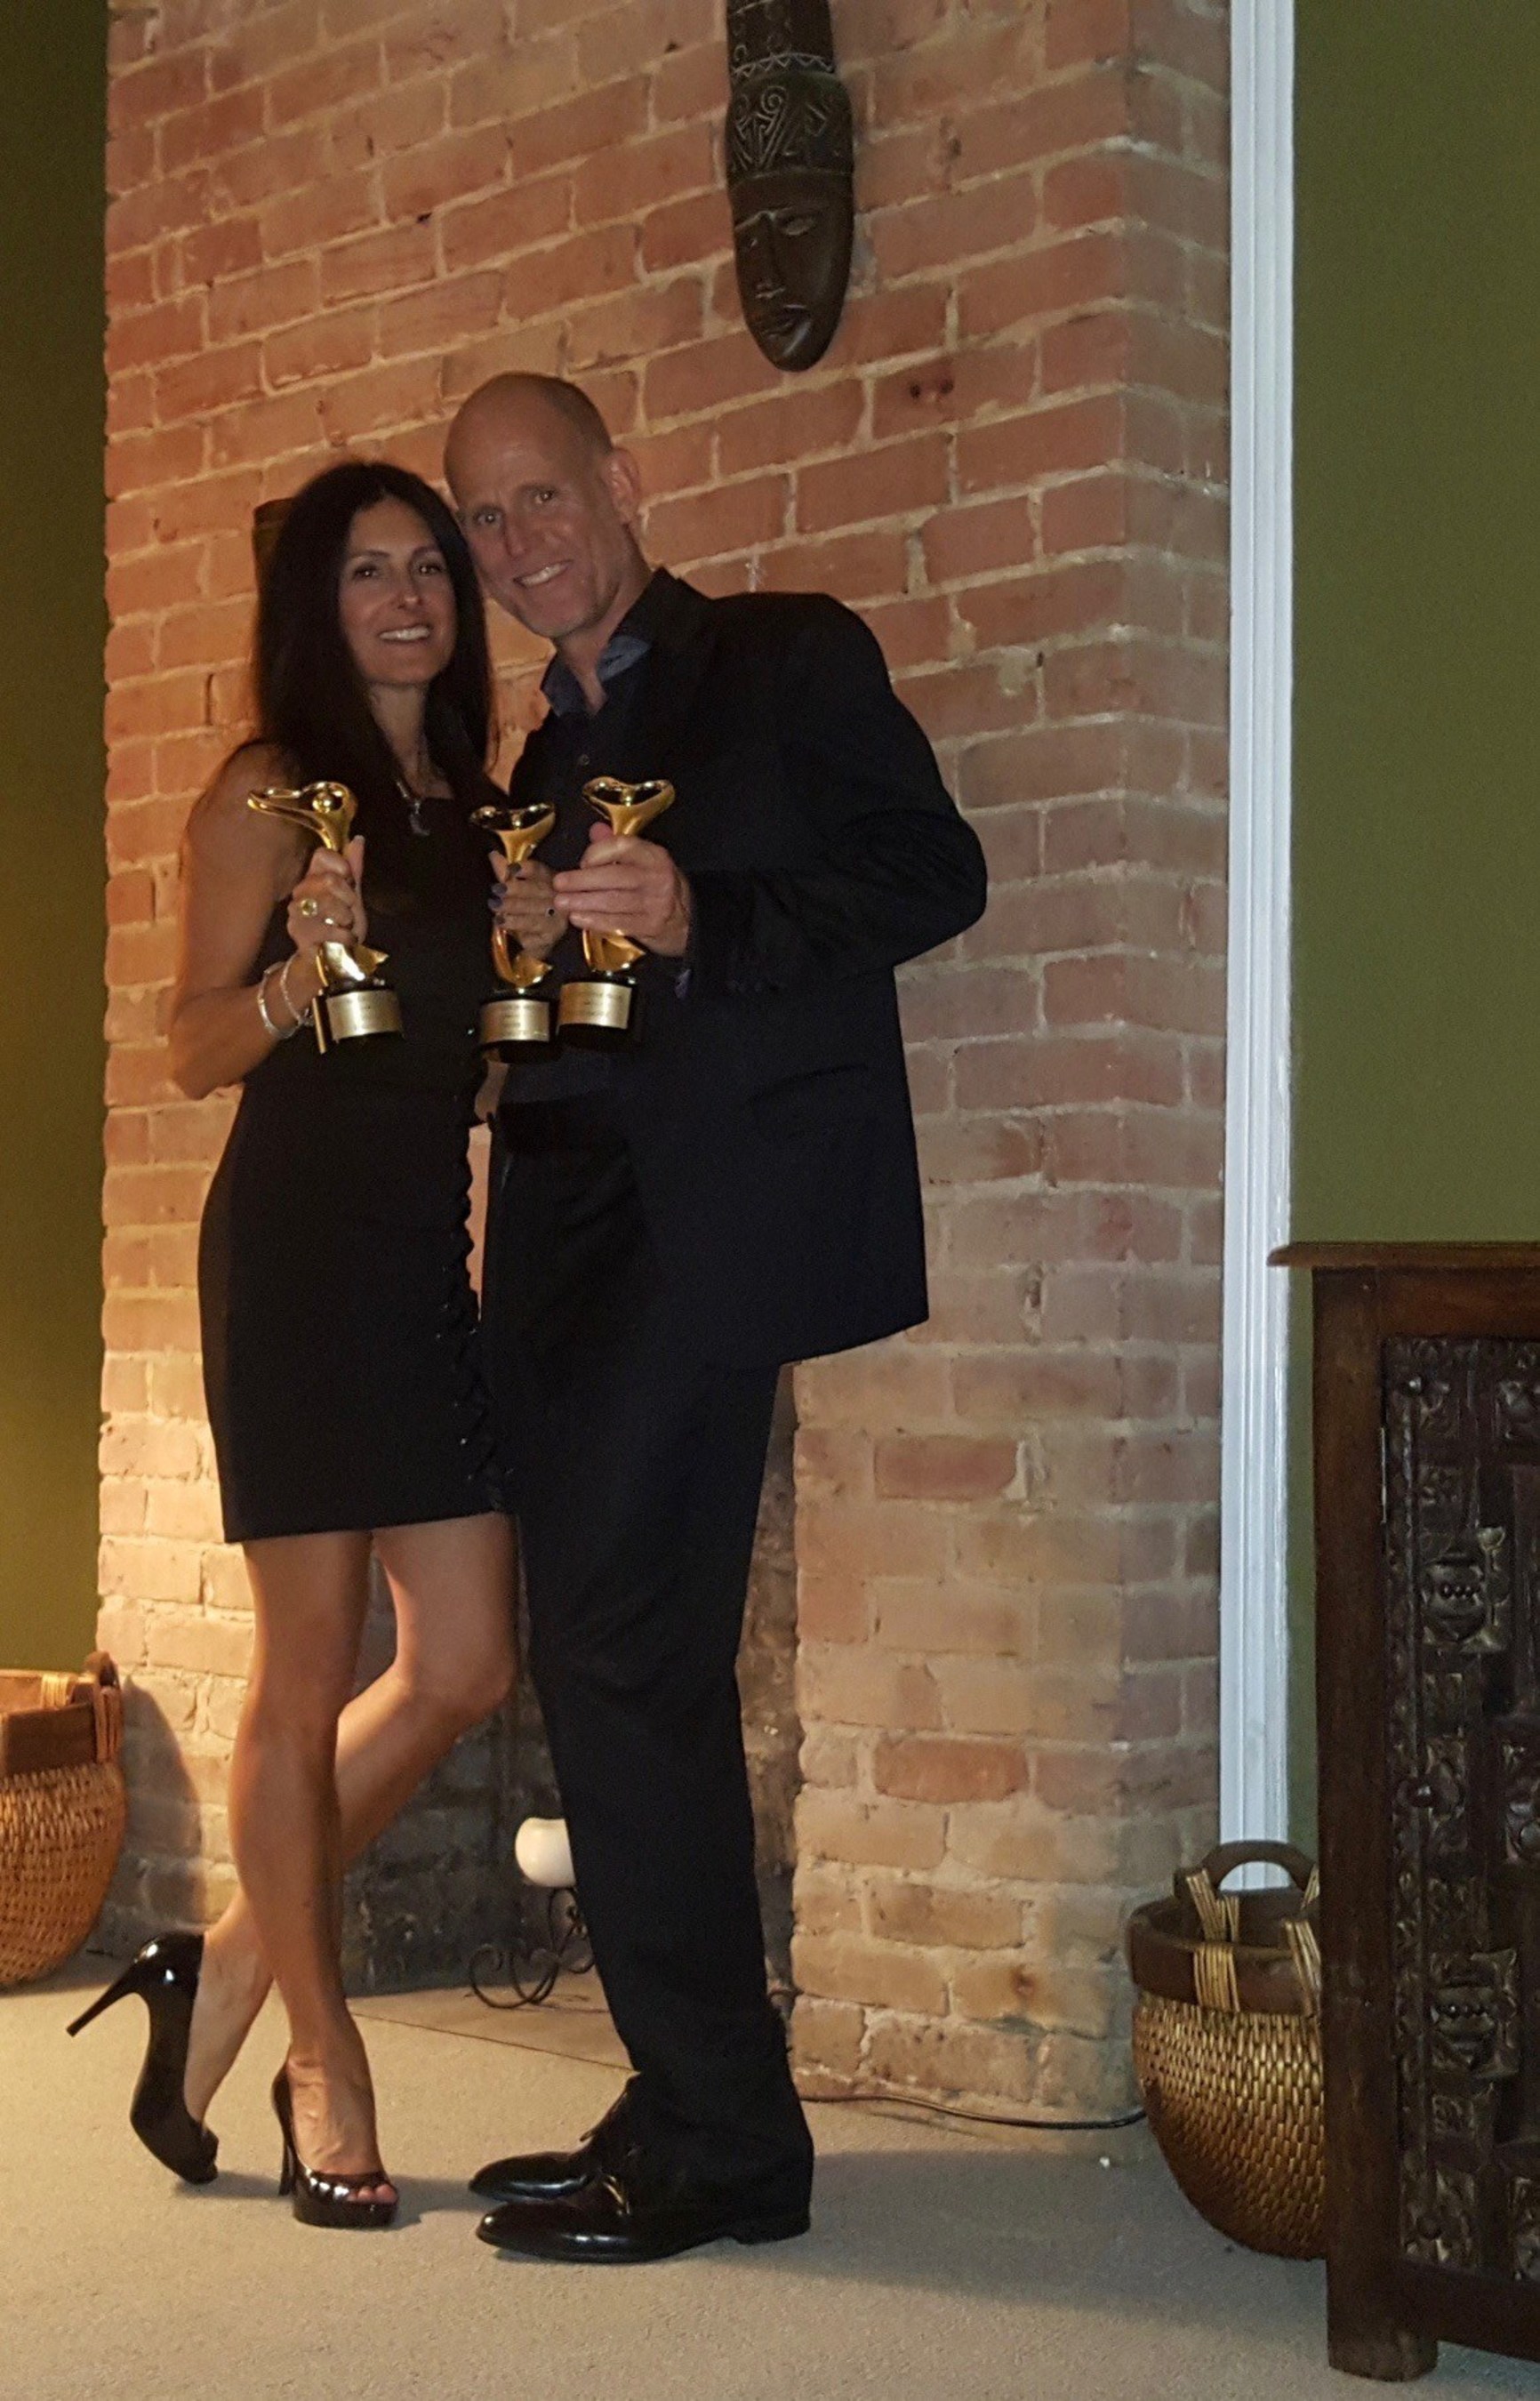 Dallas Couple Win Several Coveted Awards at 2016 Annual Lifestyle Awards pic image